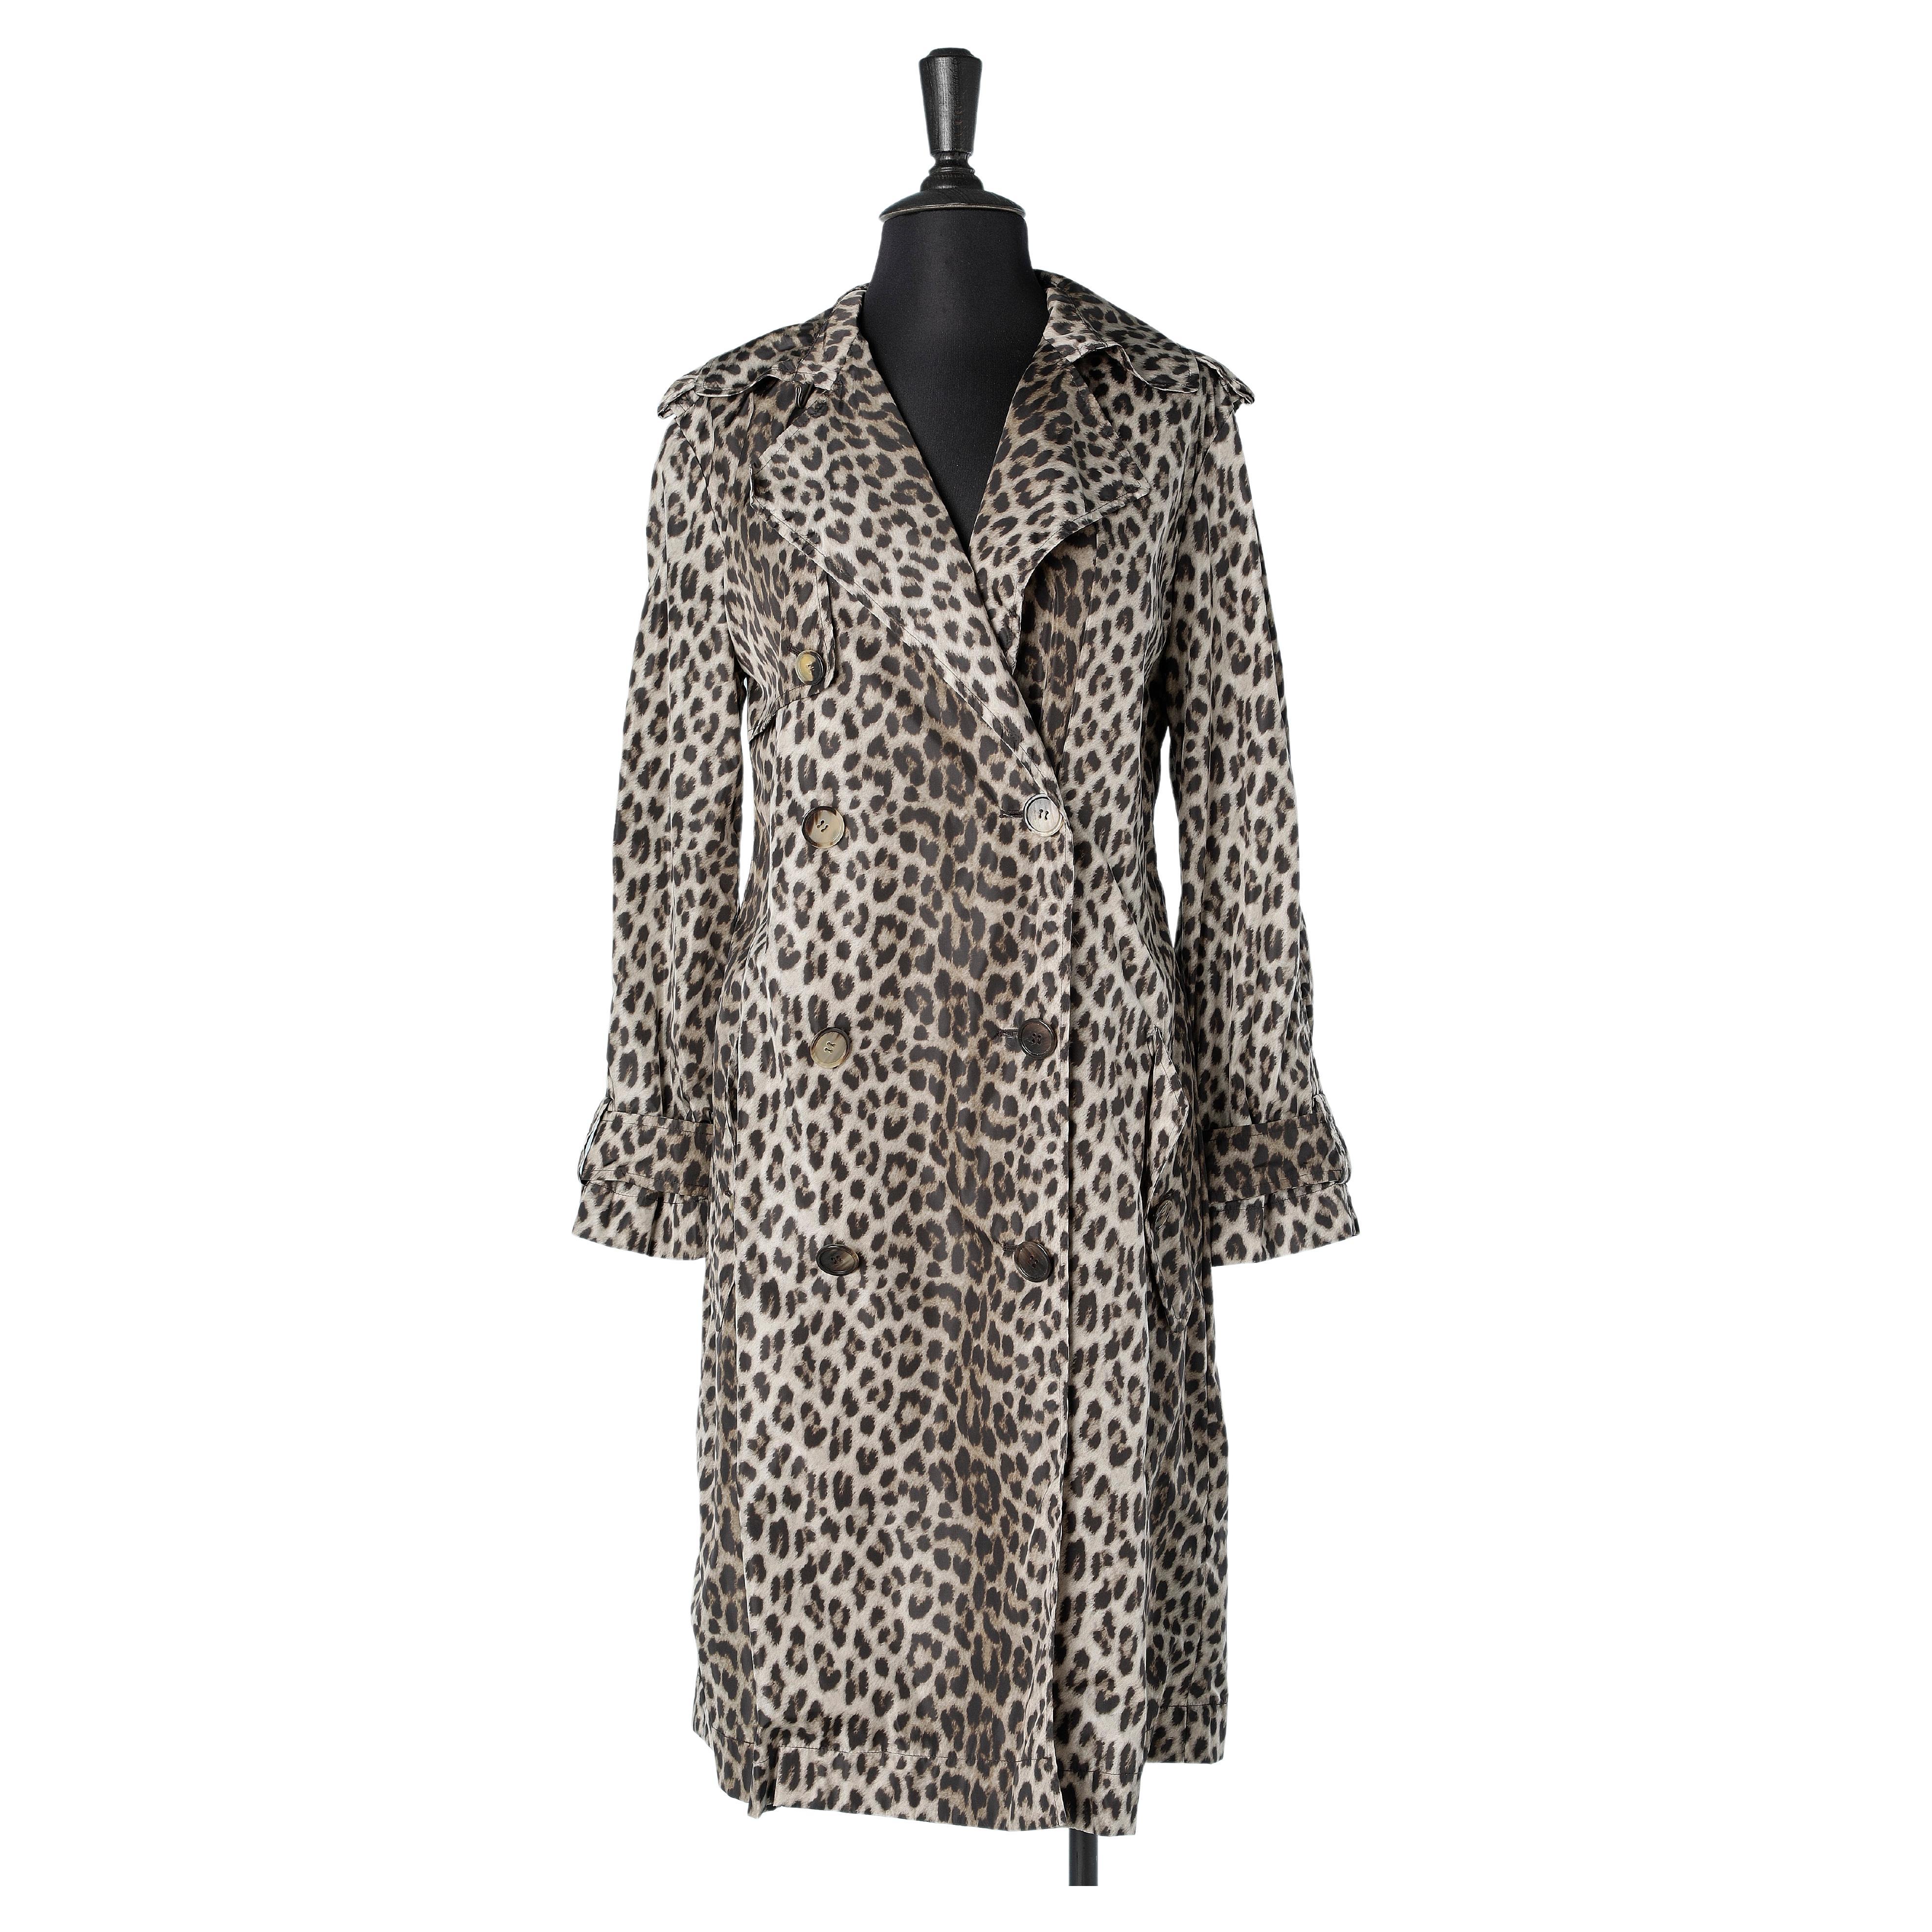 Nylon leopard printed double-breasted trench-coat Lanvin by Alber Elbaz 2010